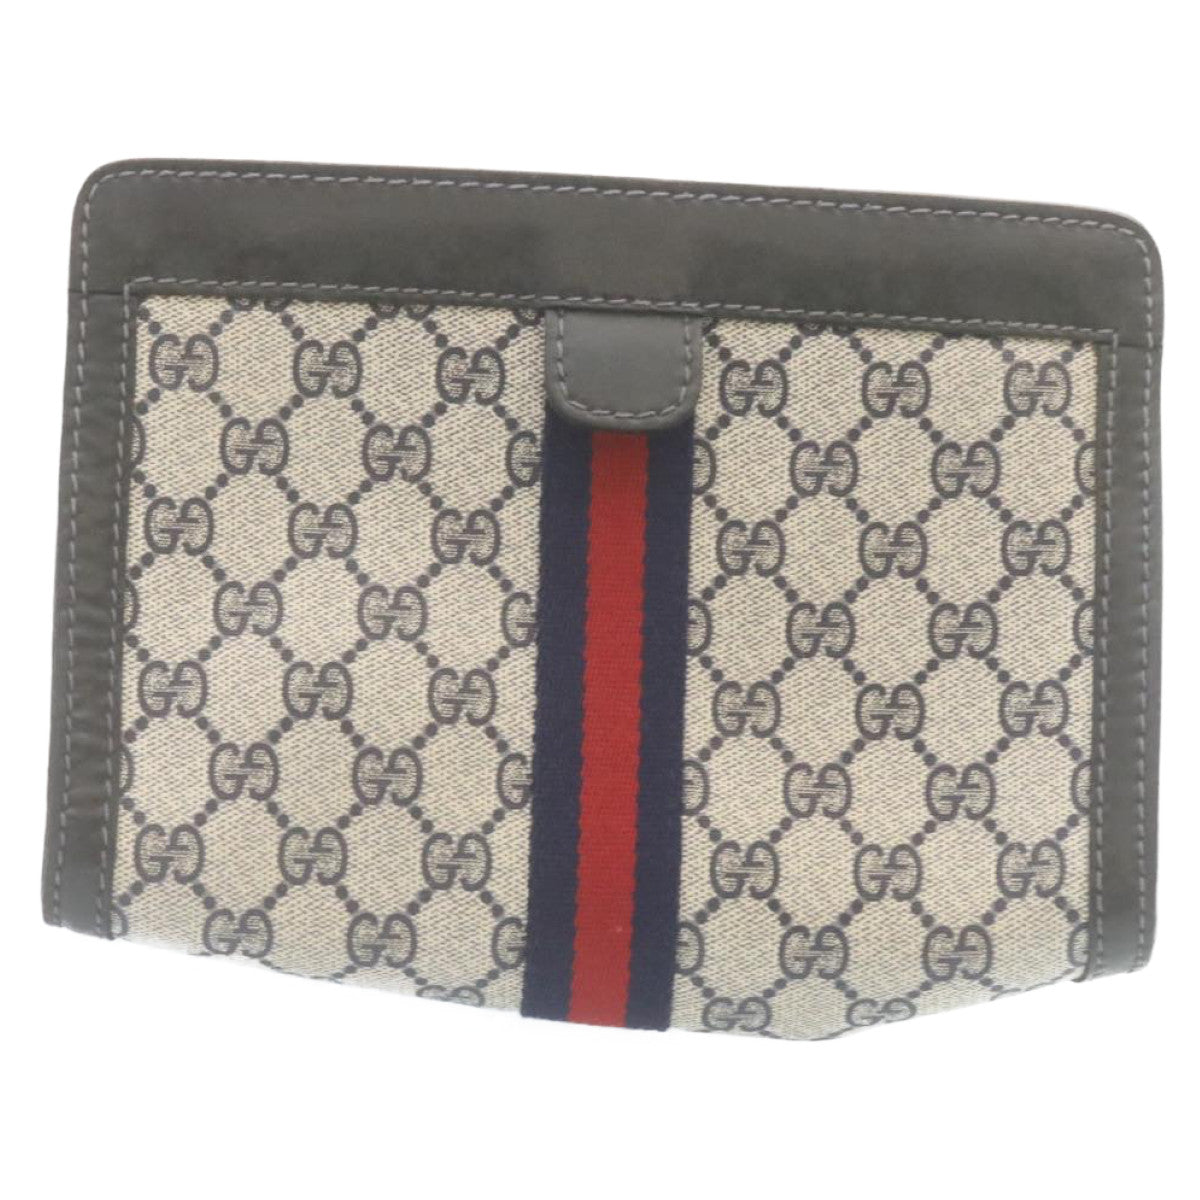 GUCCI Sherry Line GG Canvas Clutch Bag Navy Red Auth am2201g - 0